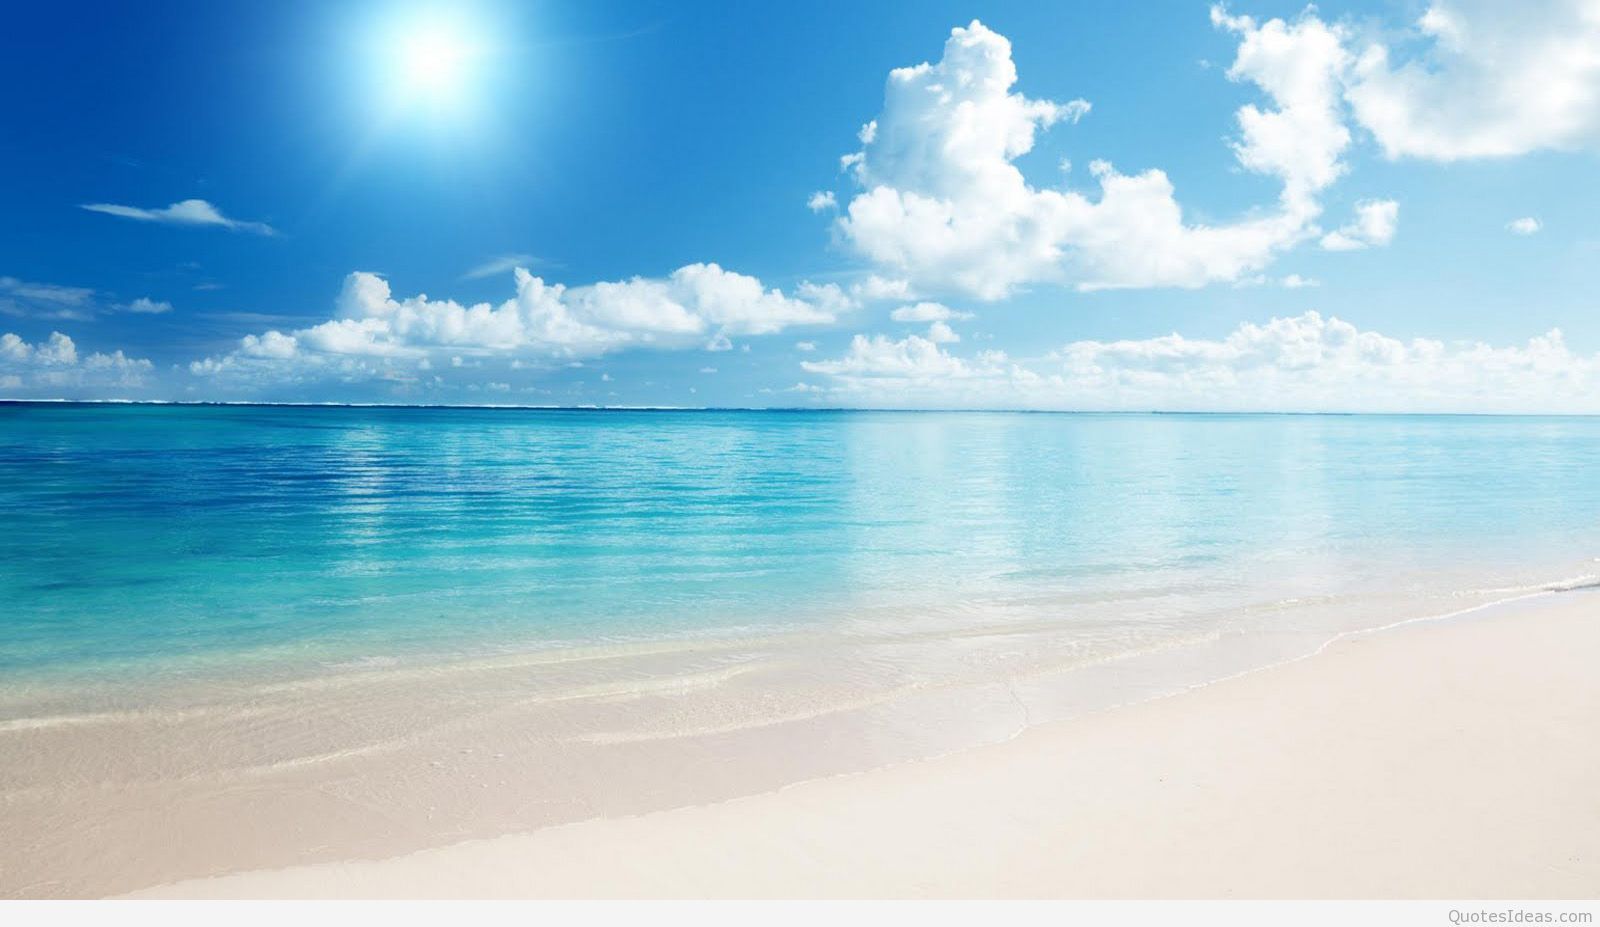 Summer wallpaper, background with sea and beach